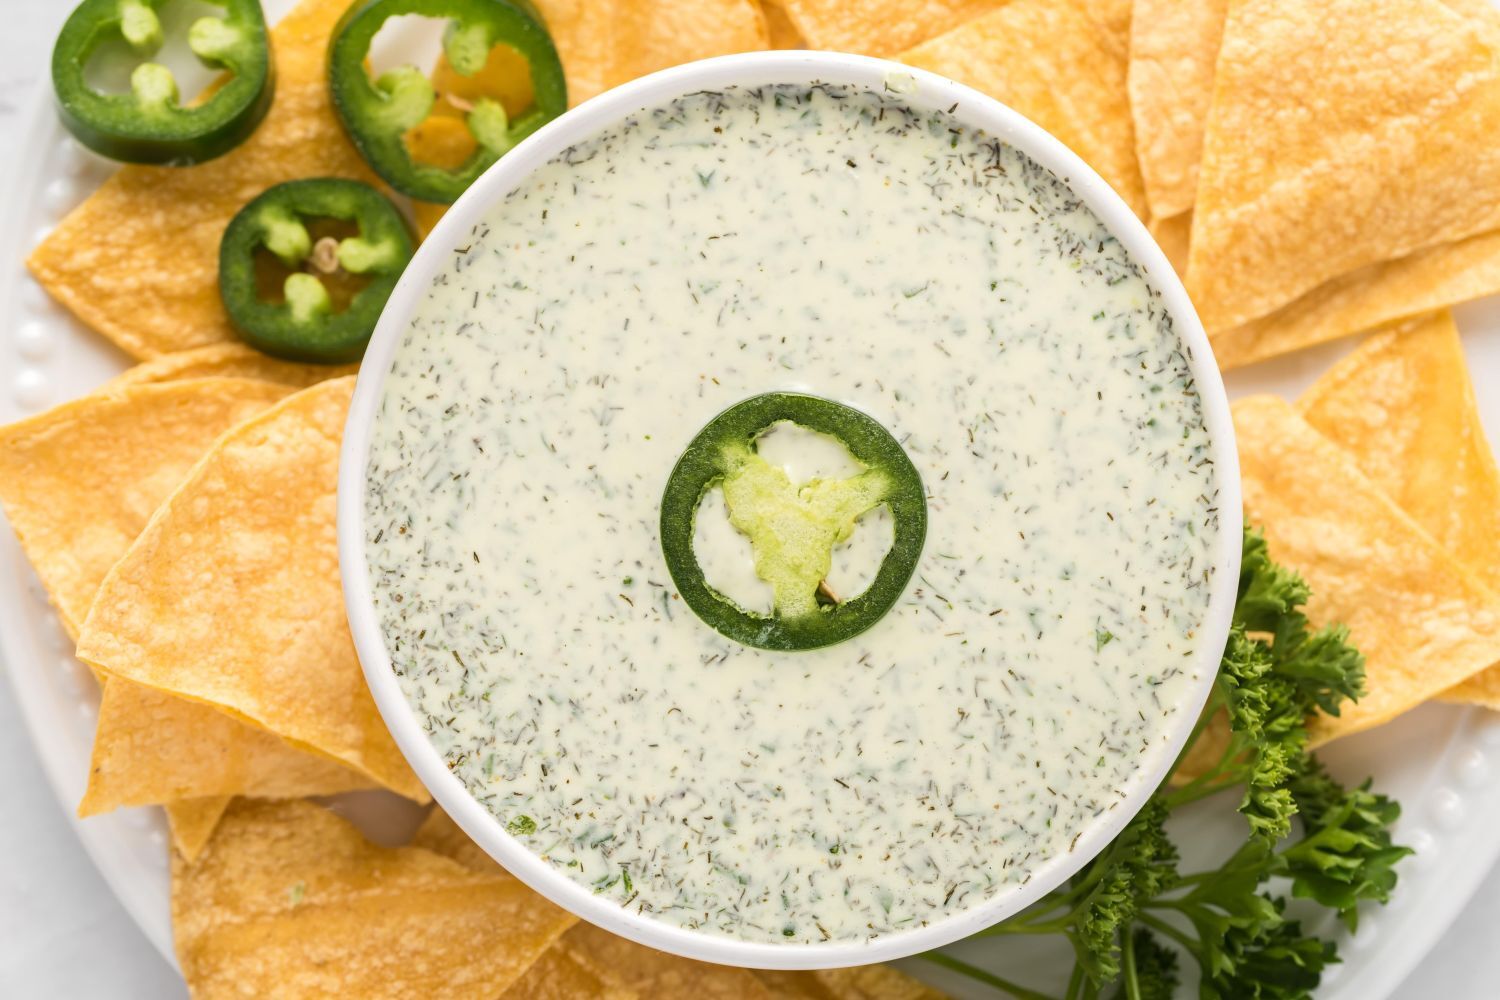 Jalapeno ranch dressing with Greek yogurt, herbs and jalapenos in a small dish with chips on the side.